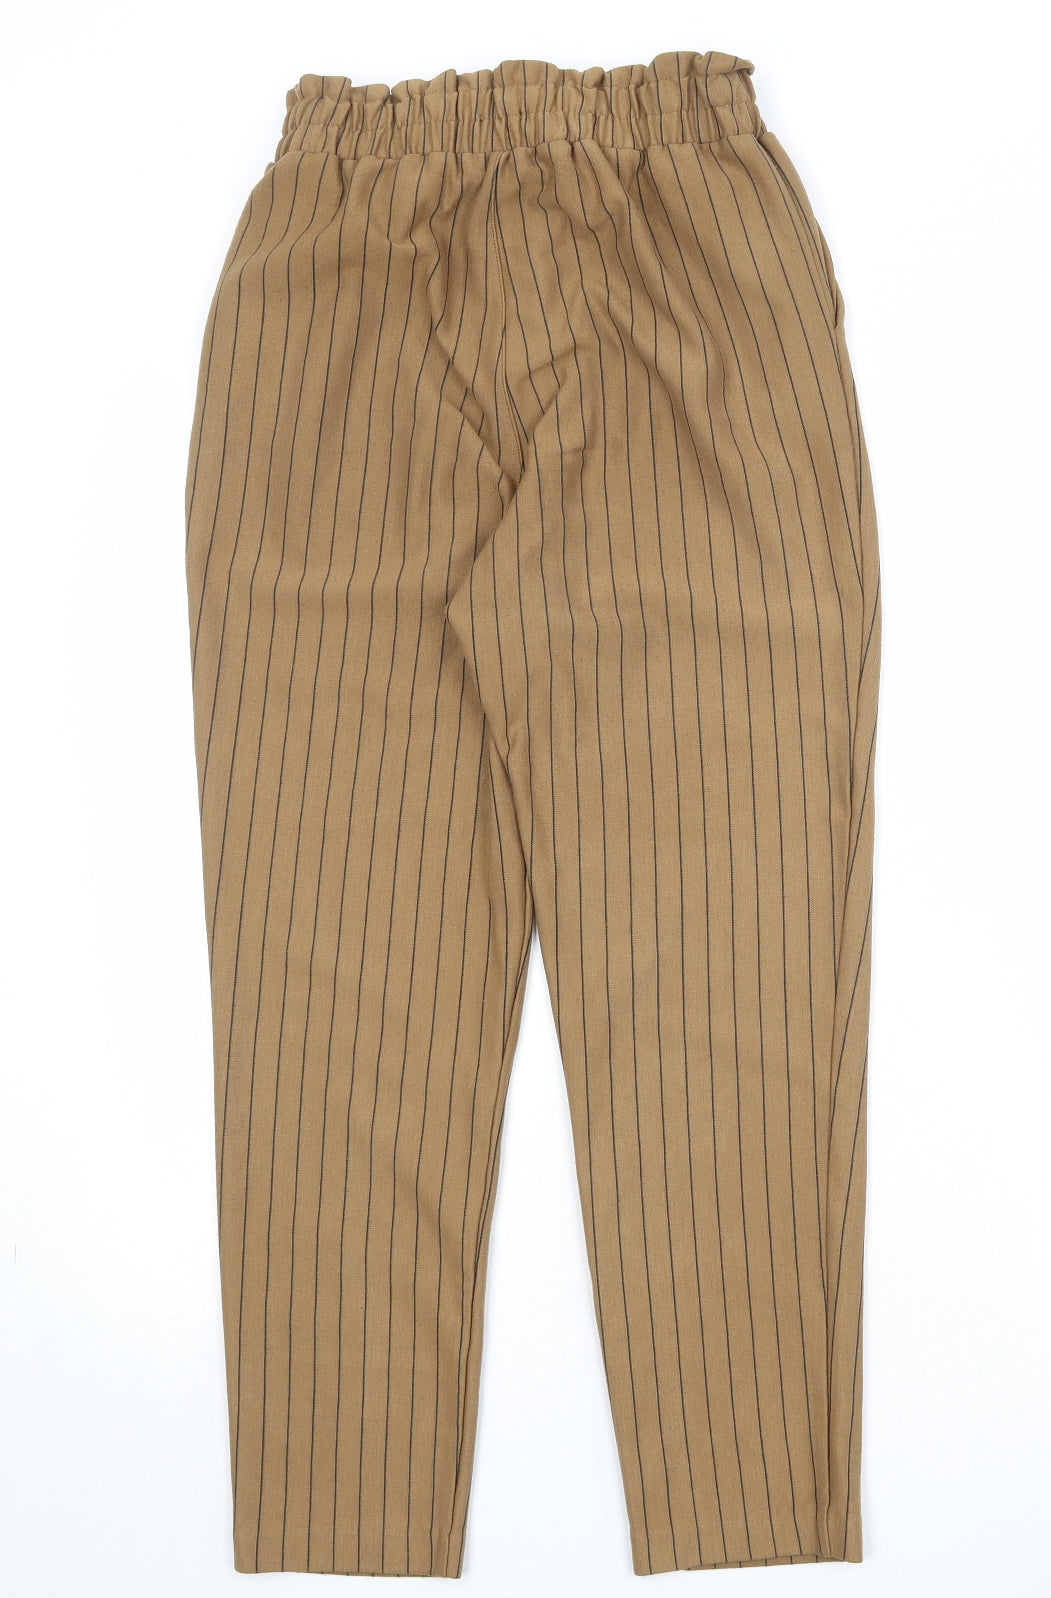 Stradivarius Womens Brown Striped Polyester Trousers Size S Regular - Tie Front Detail